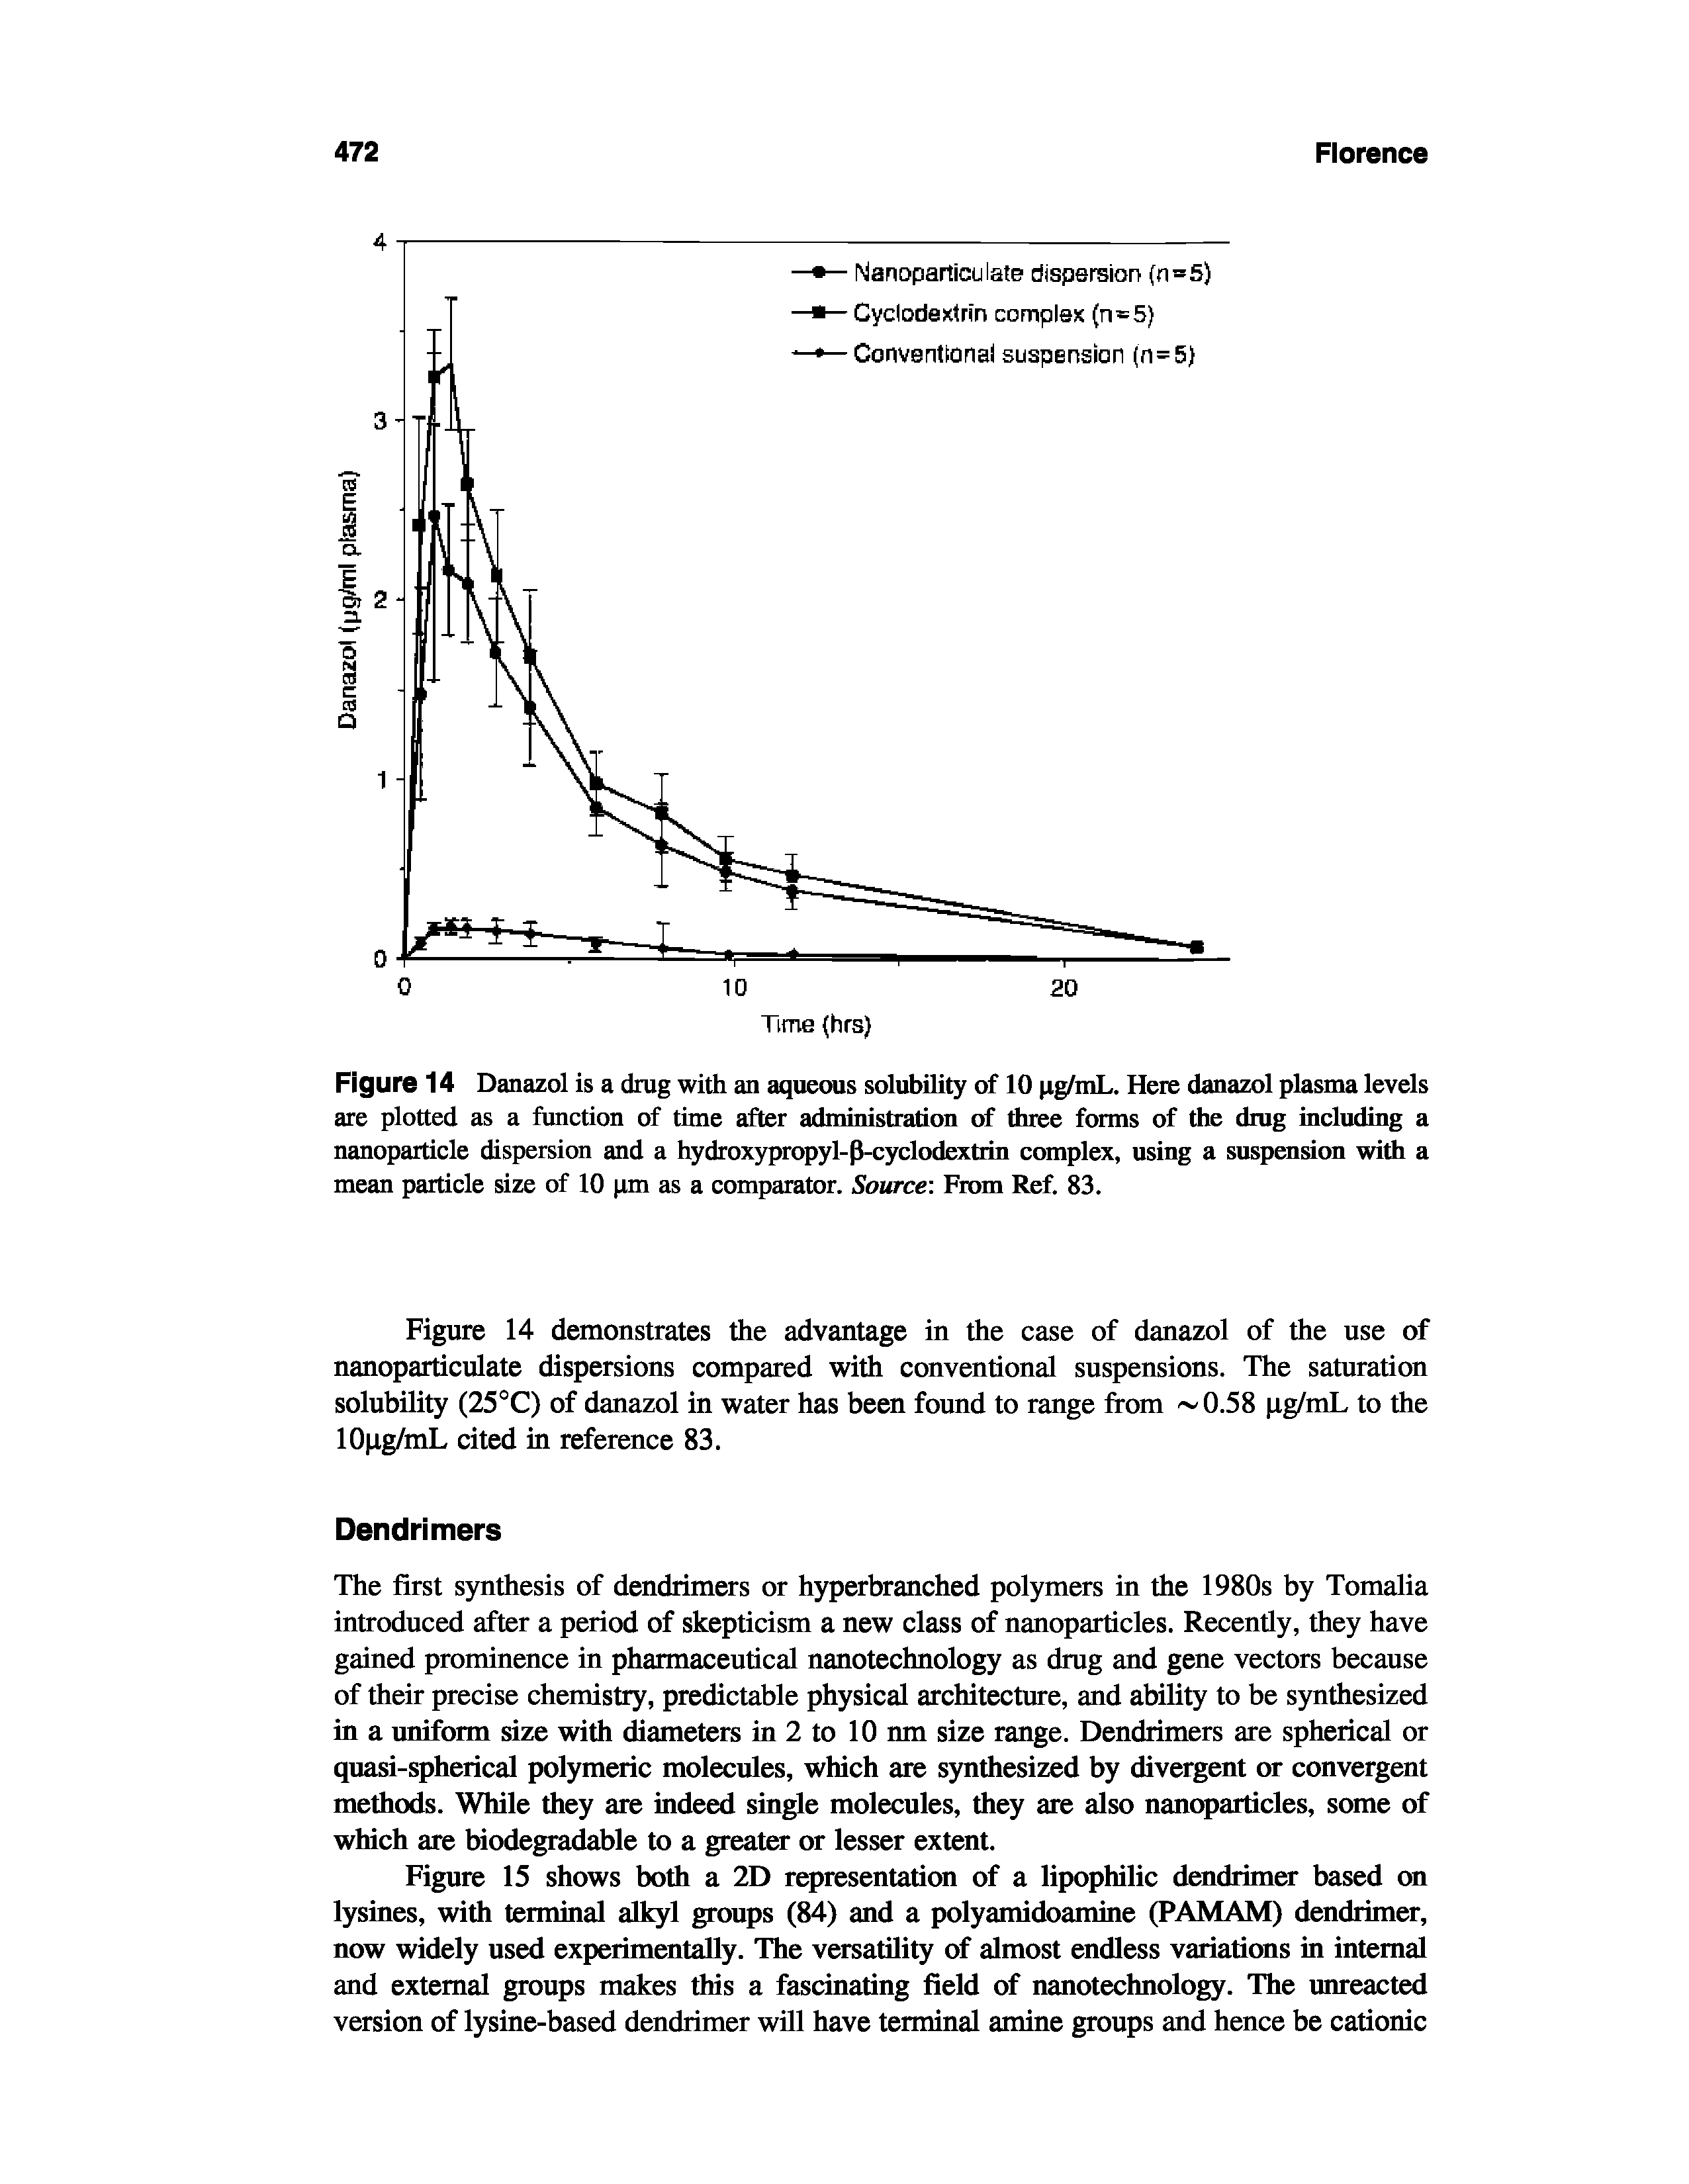 Figure 14 Danazol is a drug with an aqueous solubility of 10 ttg/mL. Here danazol plasma levels are plotted as a function of time after administration of three forms of the drug including a nanoparticle dispersion and a hydroxypropyl-P-cyclodextrin complex, using a suspension with a mean particle size of 10 pm as a comparator. Source From Ref. 83.